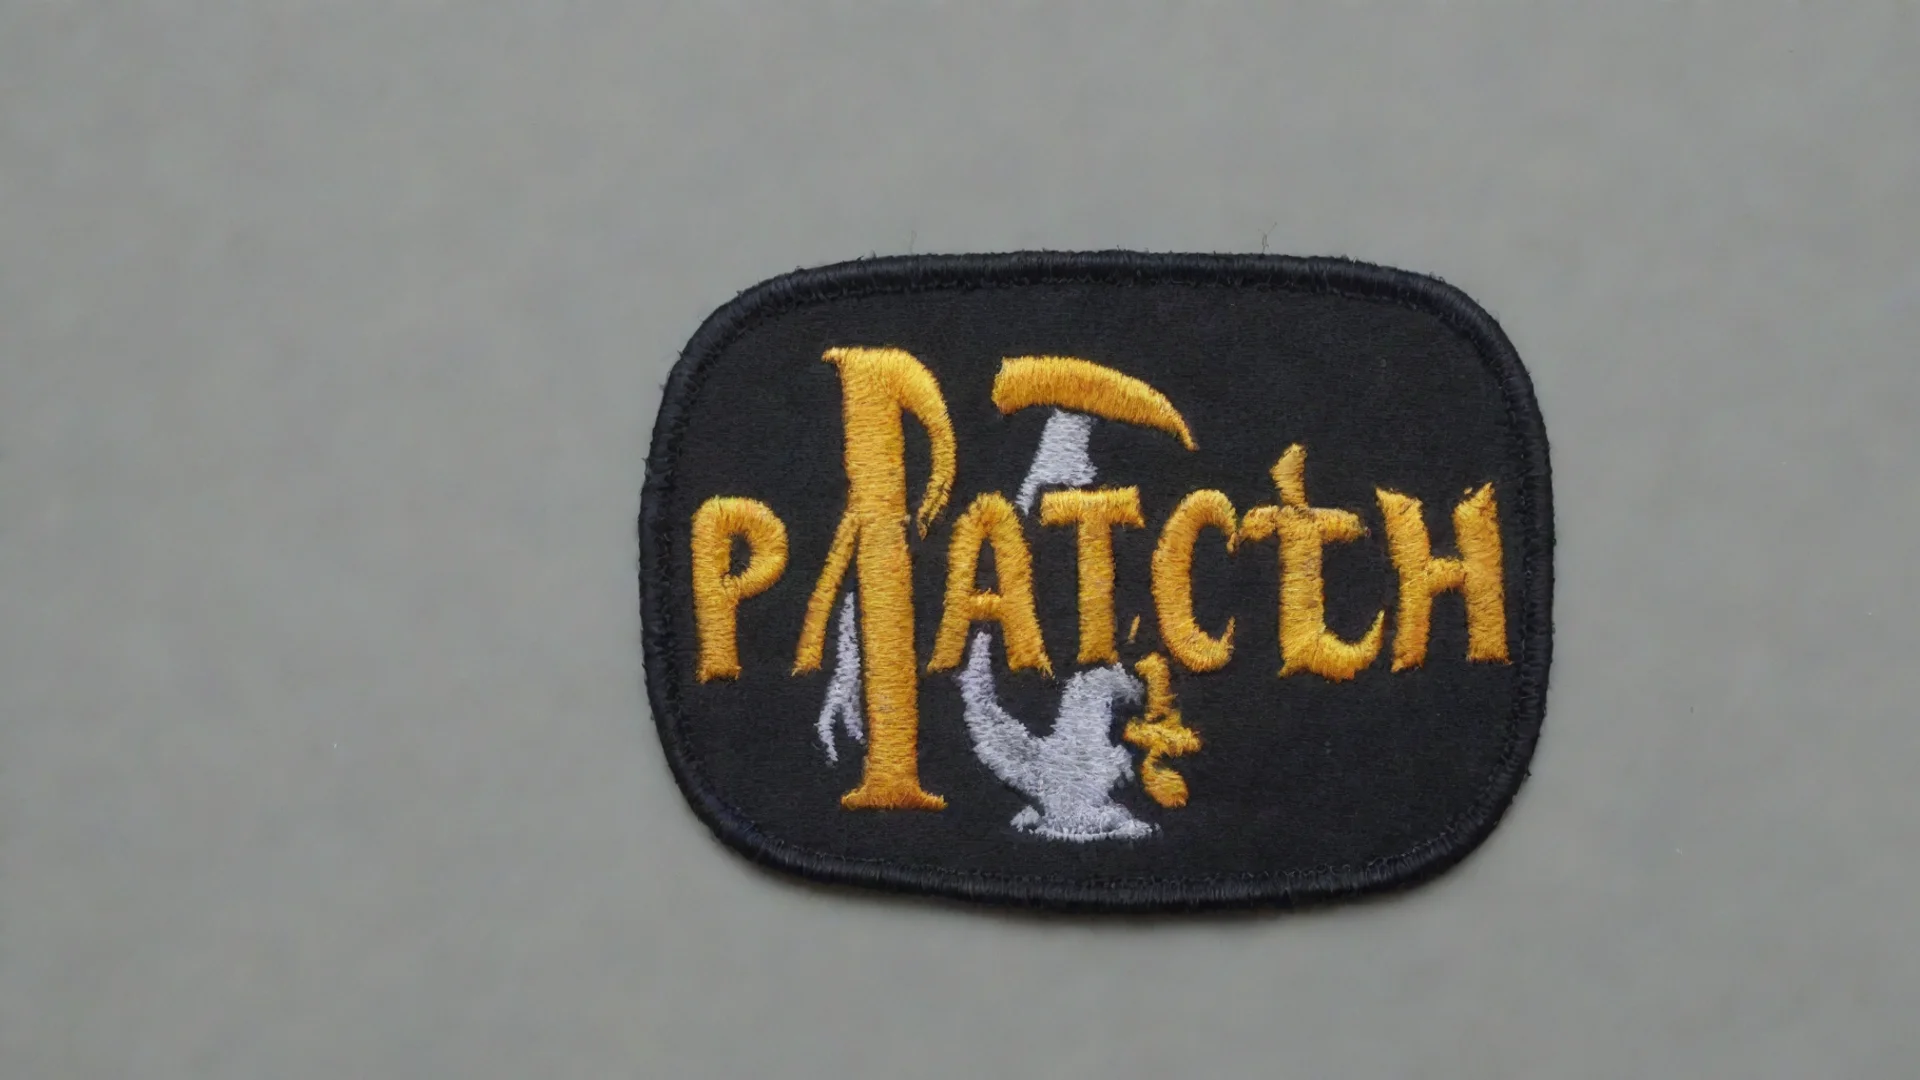 amazing patch awesome portrait 2 wide